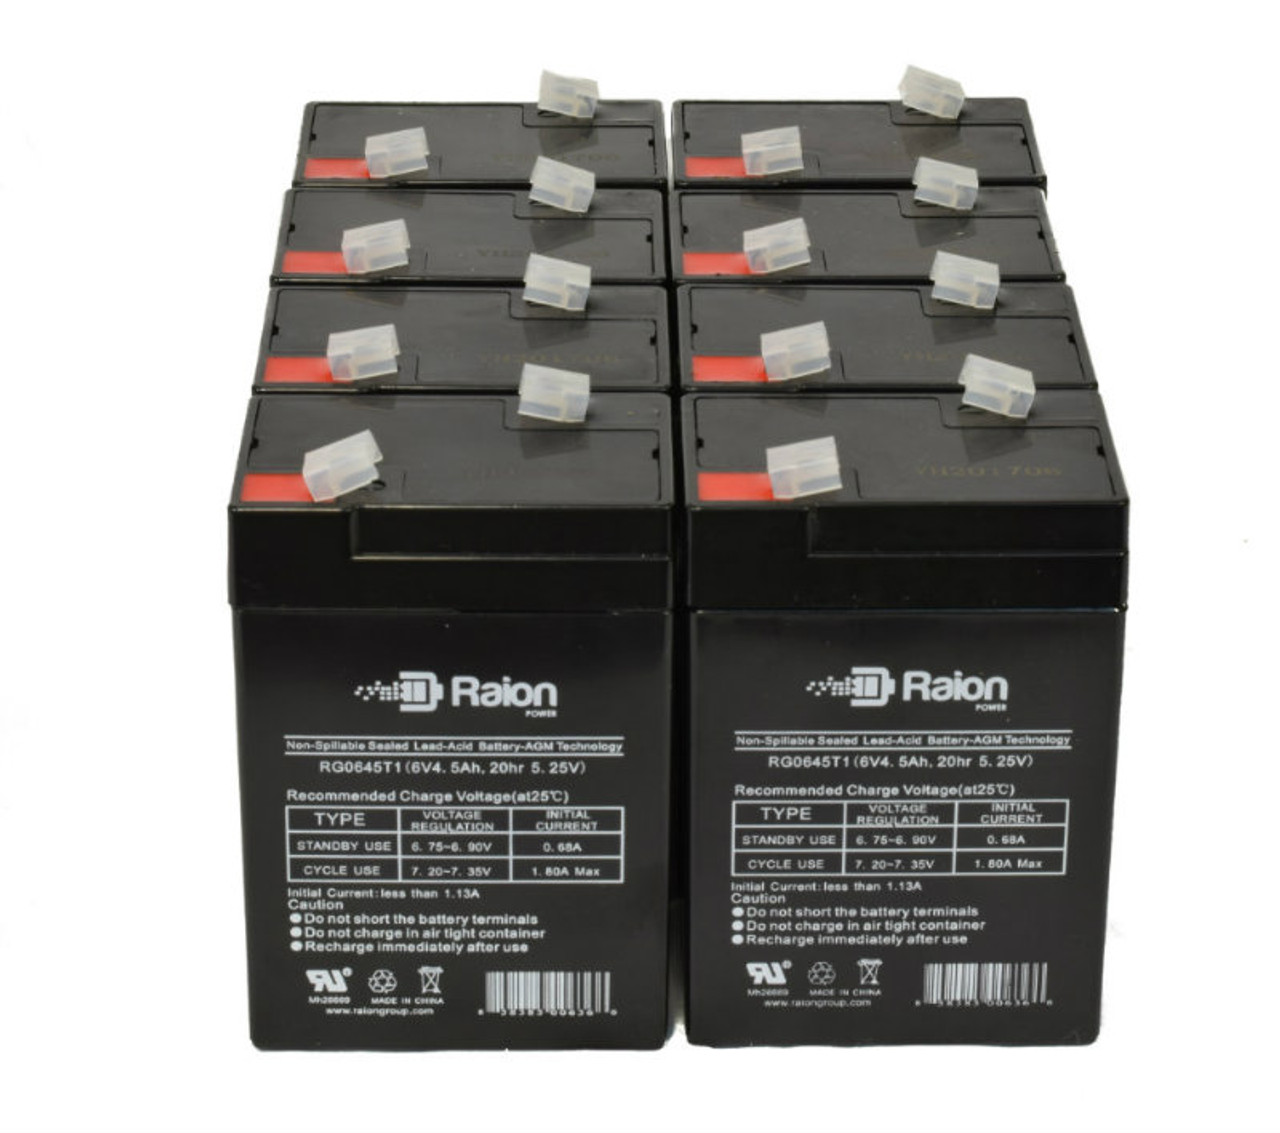 Raion Power RG0645T1 6V 4.5Ah Replacement Medical Equipment Battery for Philips HC102 - 8 Pack